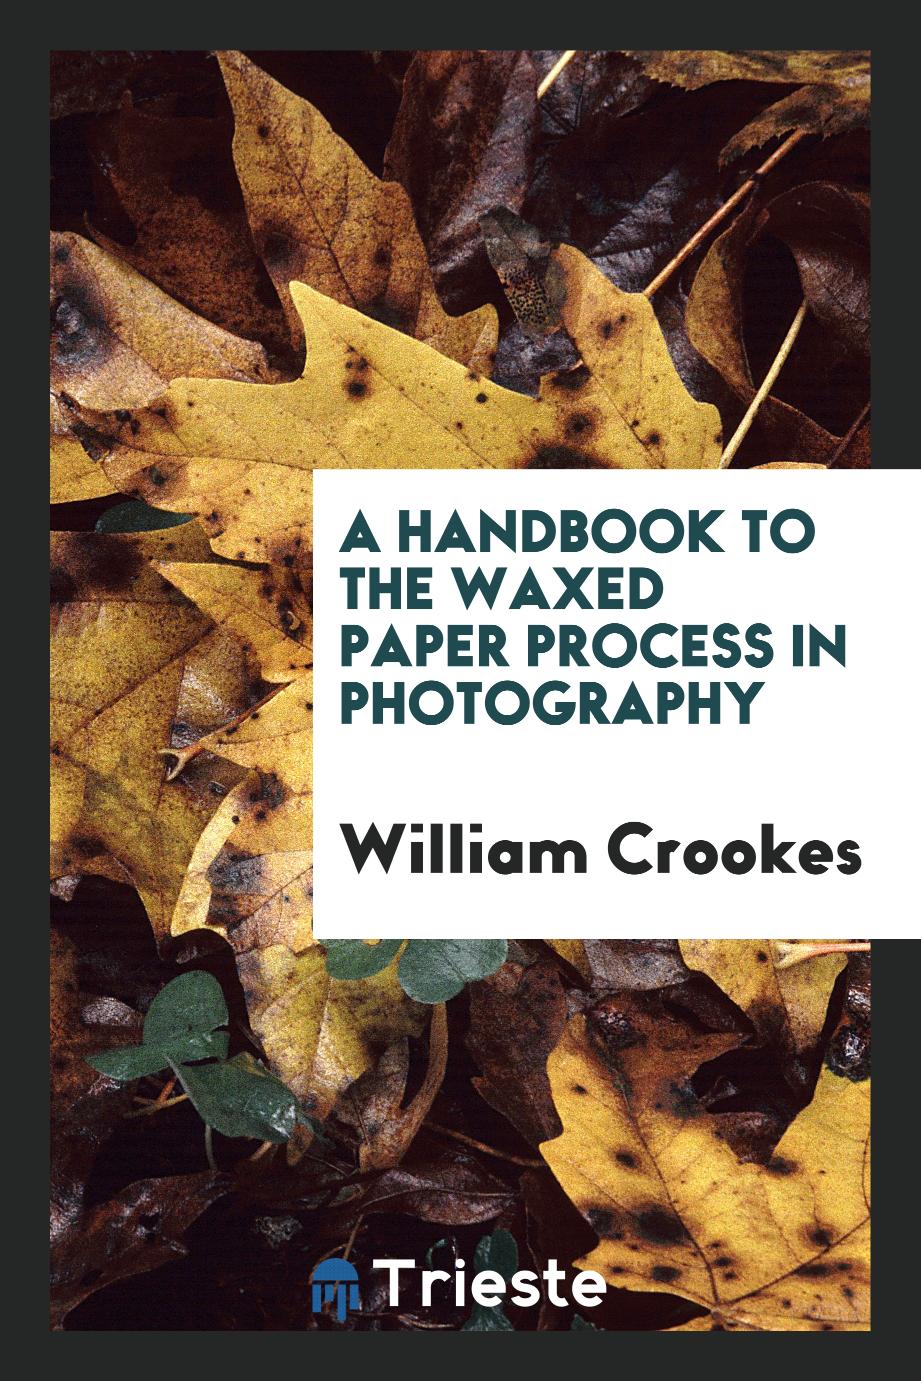 A handbook to the waxed paper process in photography